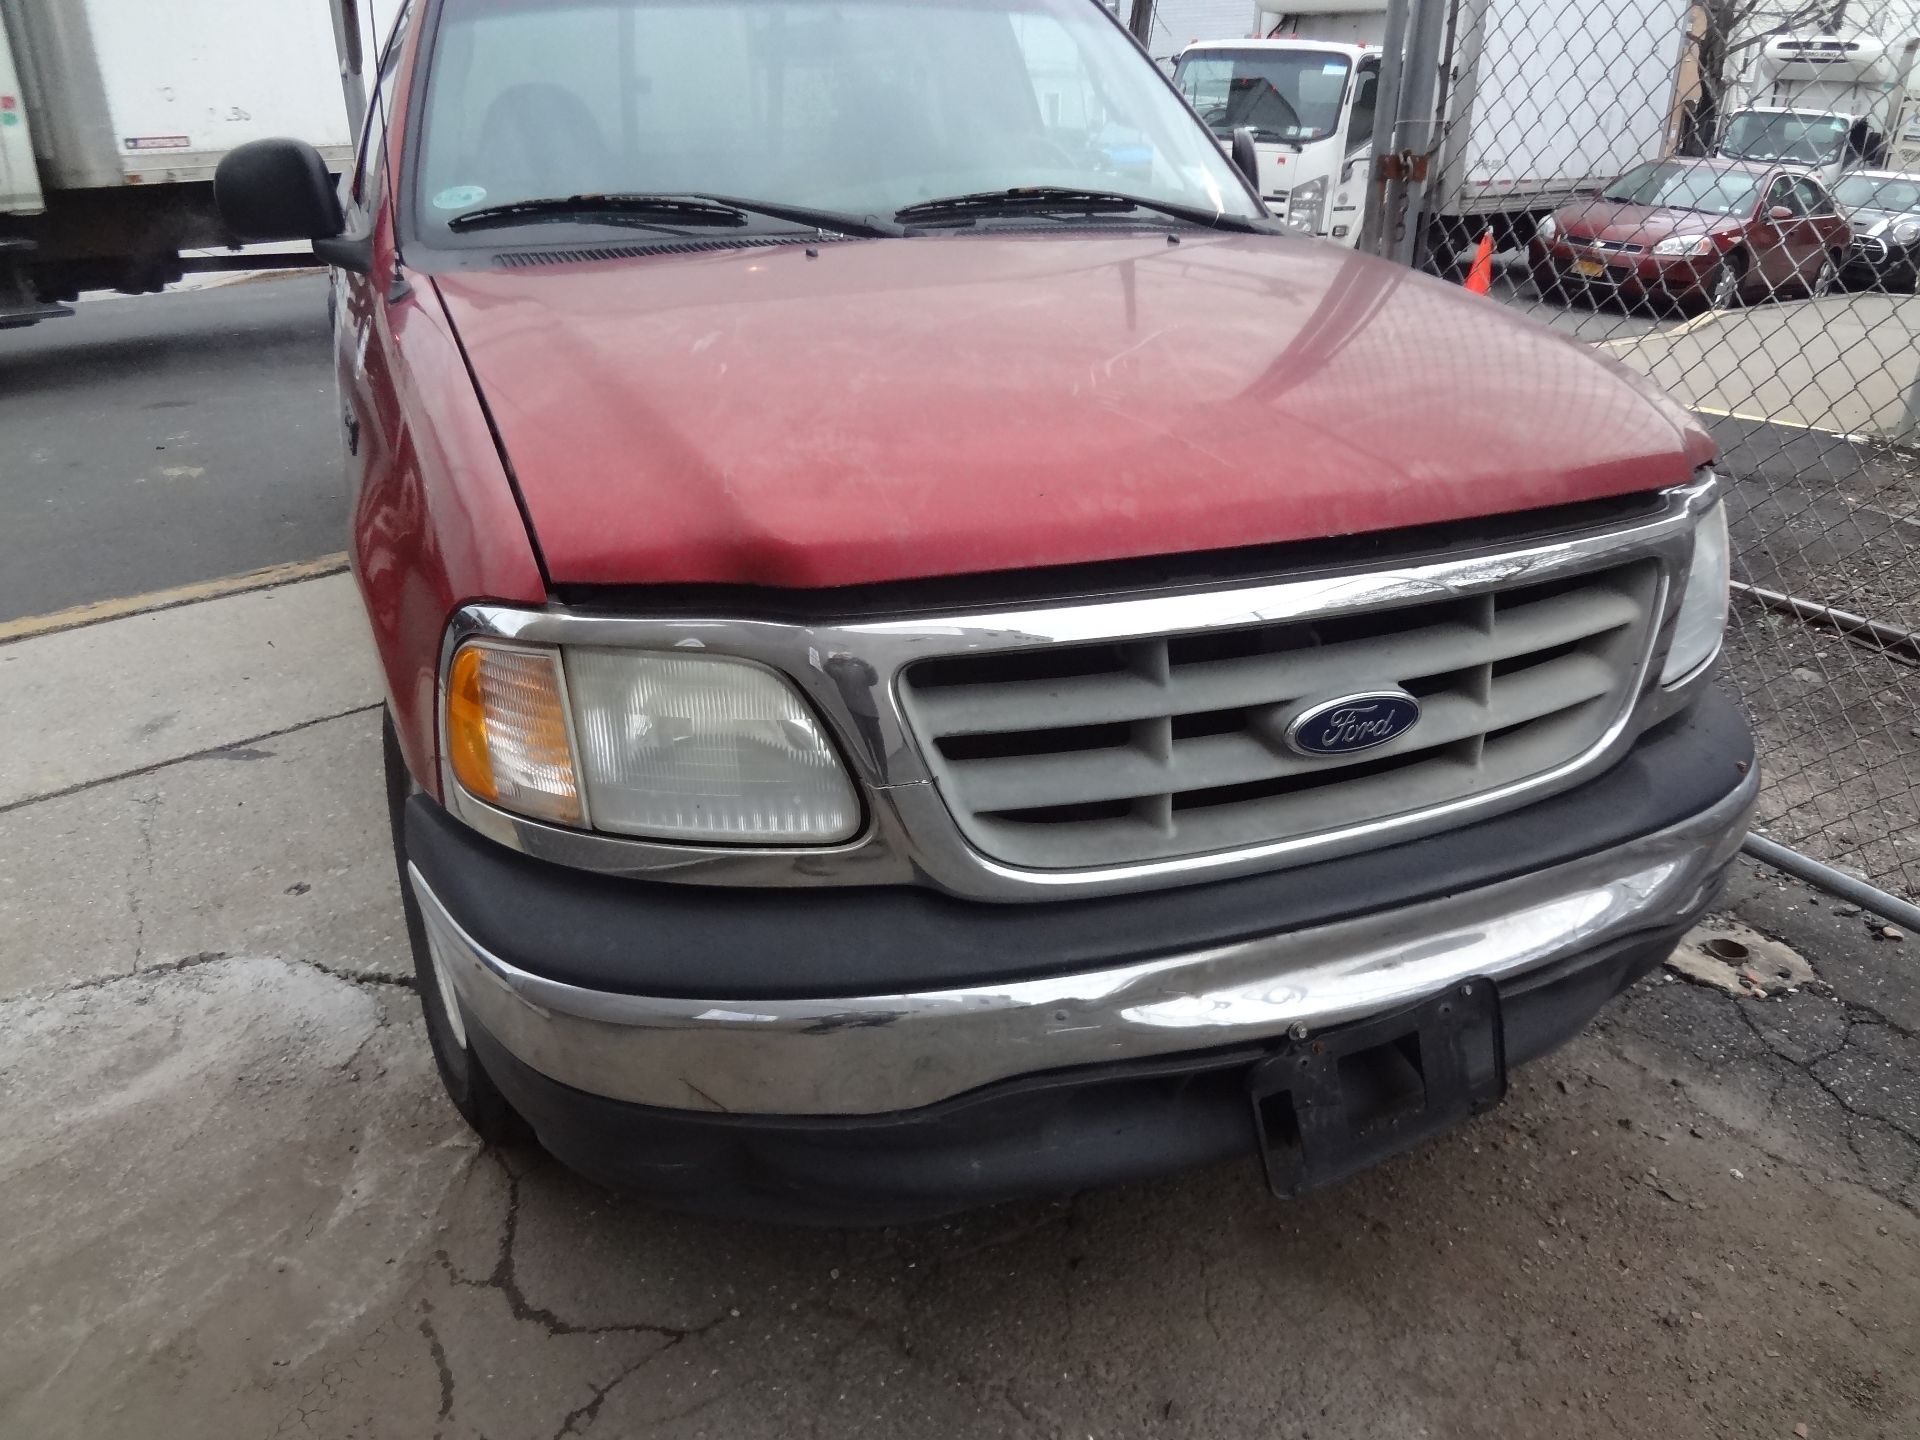 2001 FORD F-150XL 2-DOOR PICKUP TRUCK, APPROXIMATELY 169,000 MILES, VIN: 1FTZF172X1NB38572 - Image 7 of 12